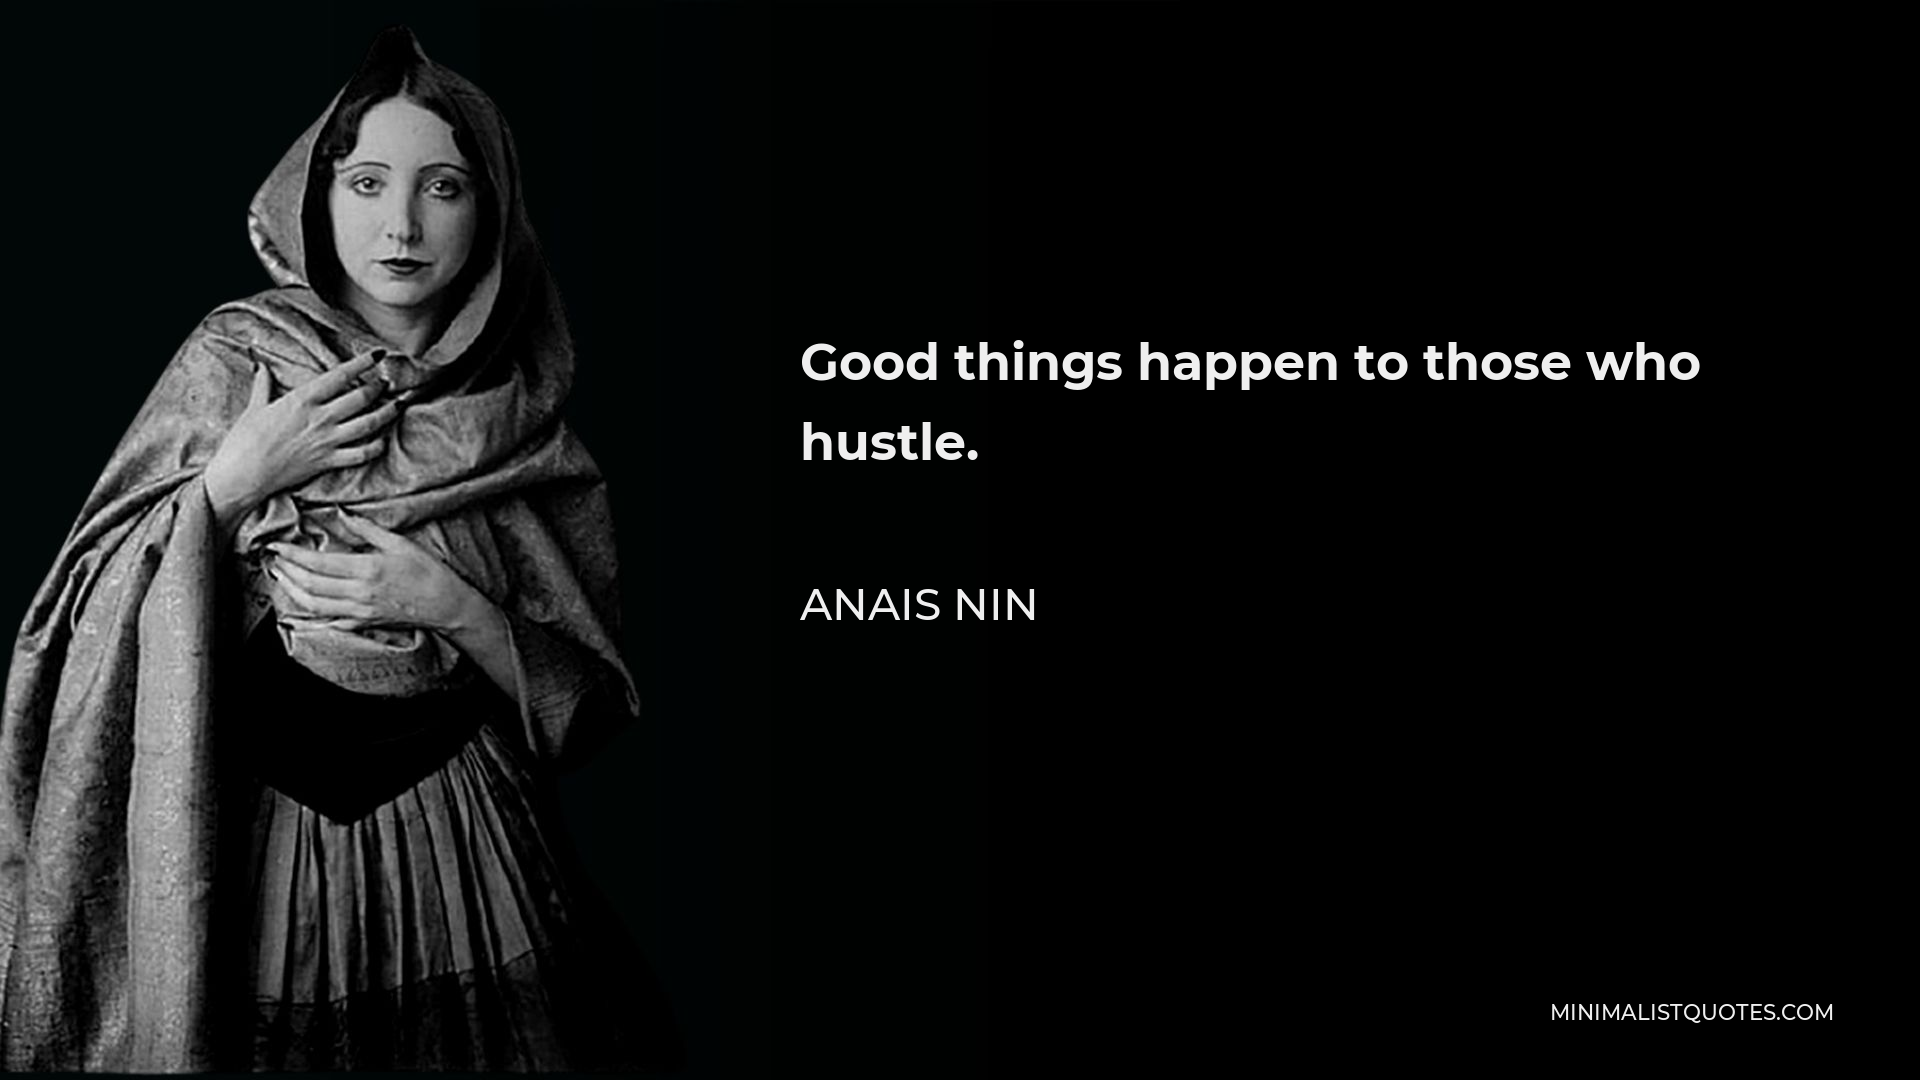 Anais Nin Quote - Good things happen to those who hustle.